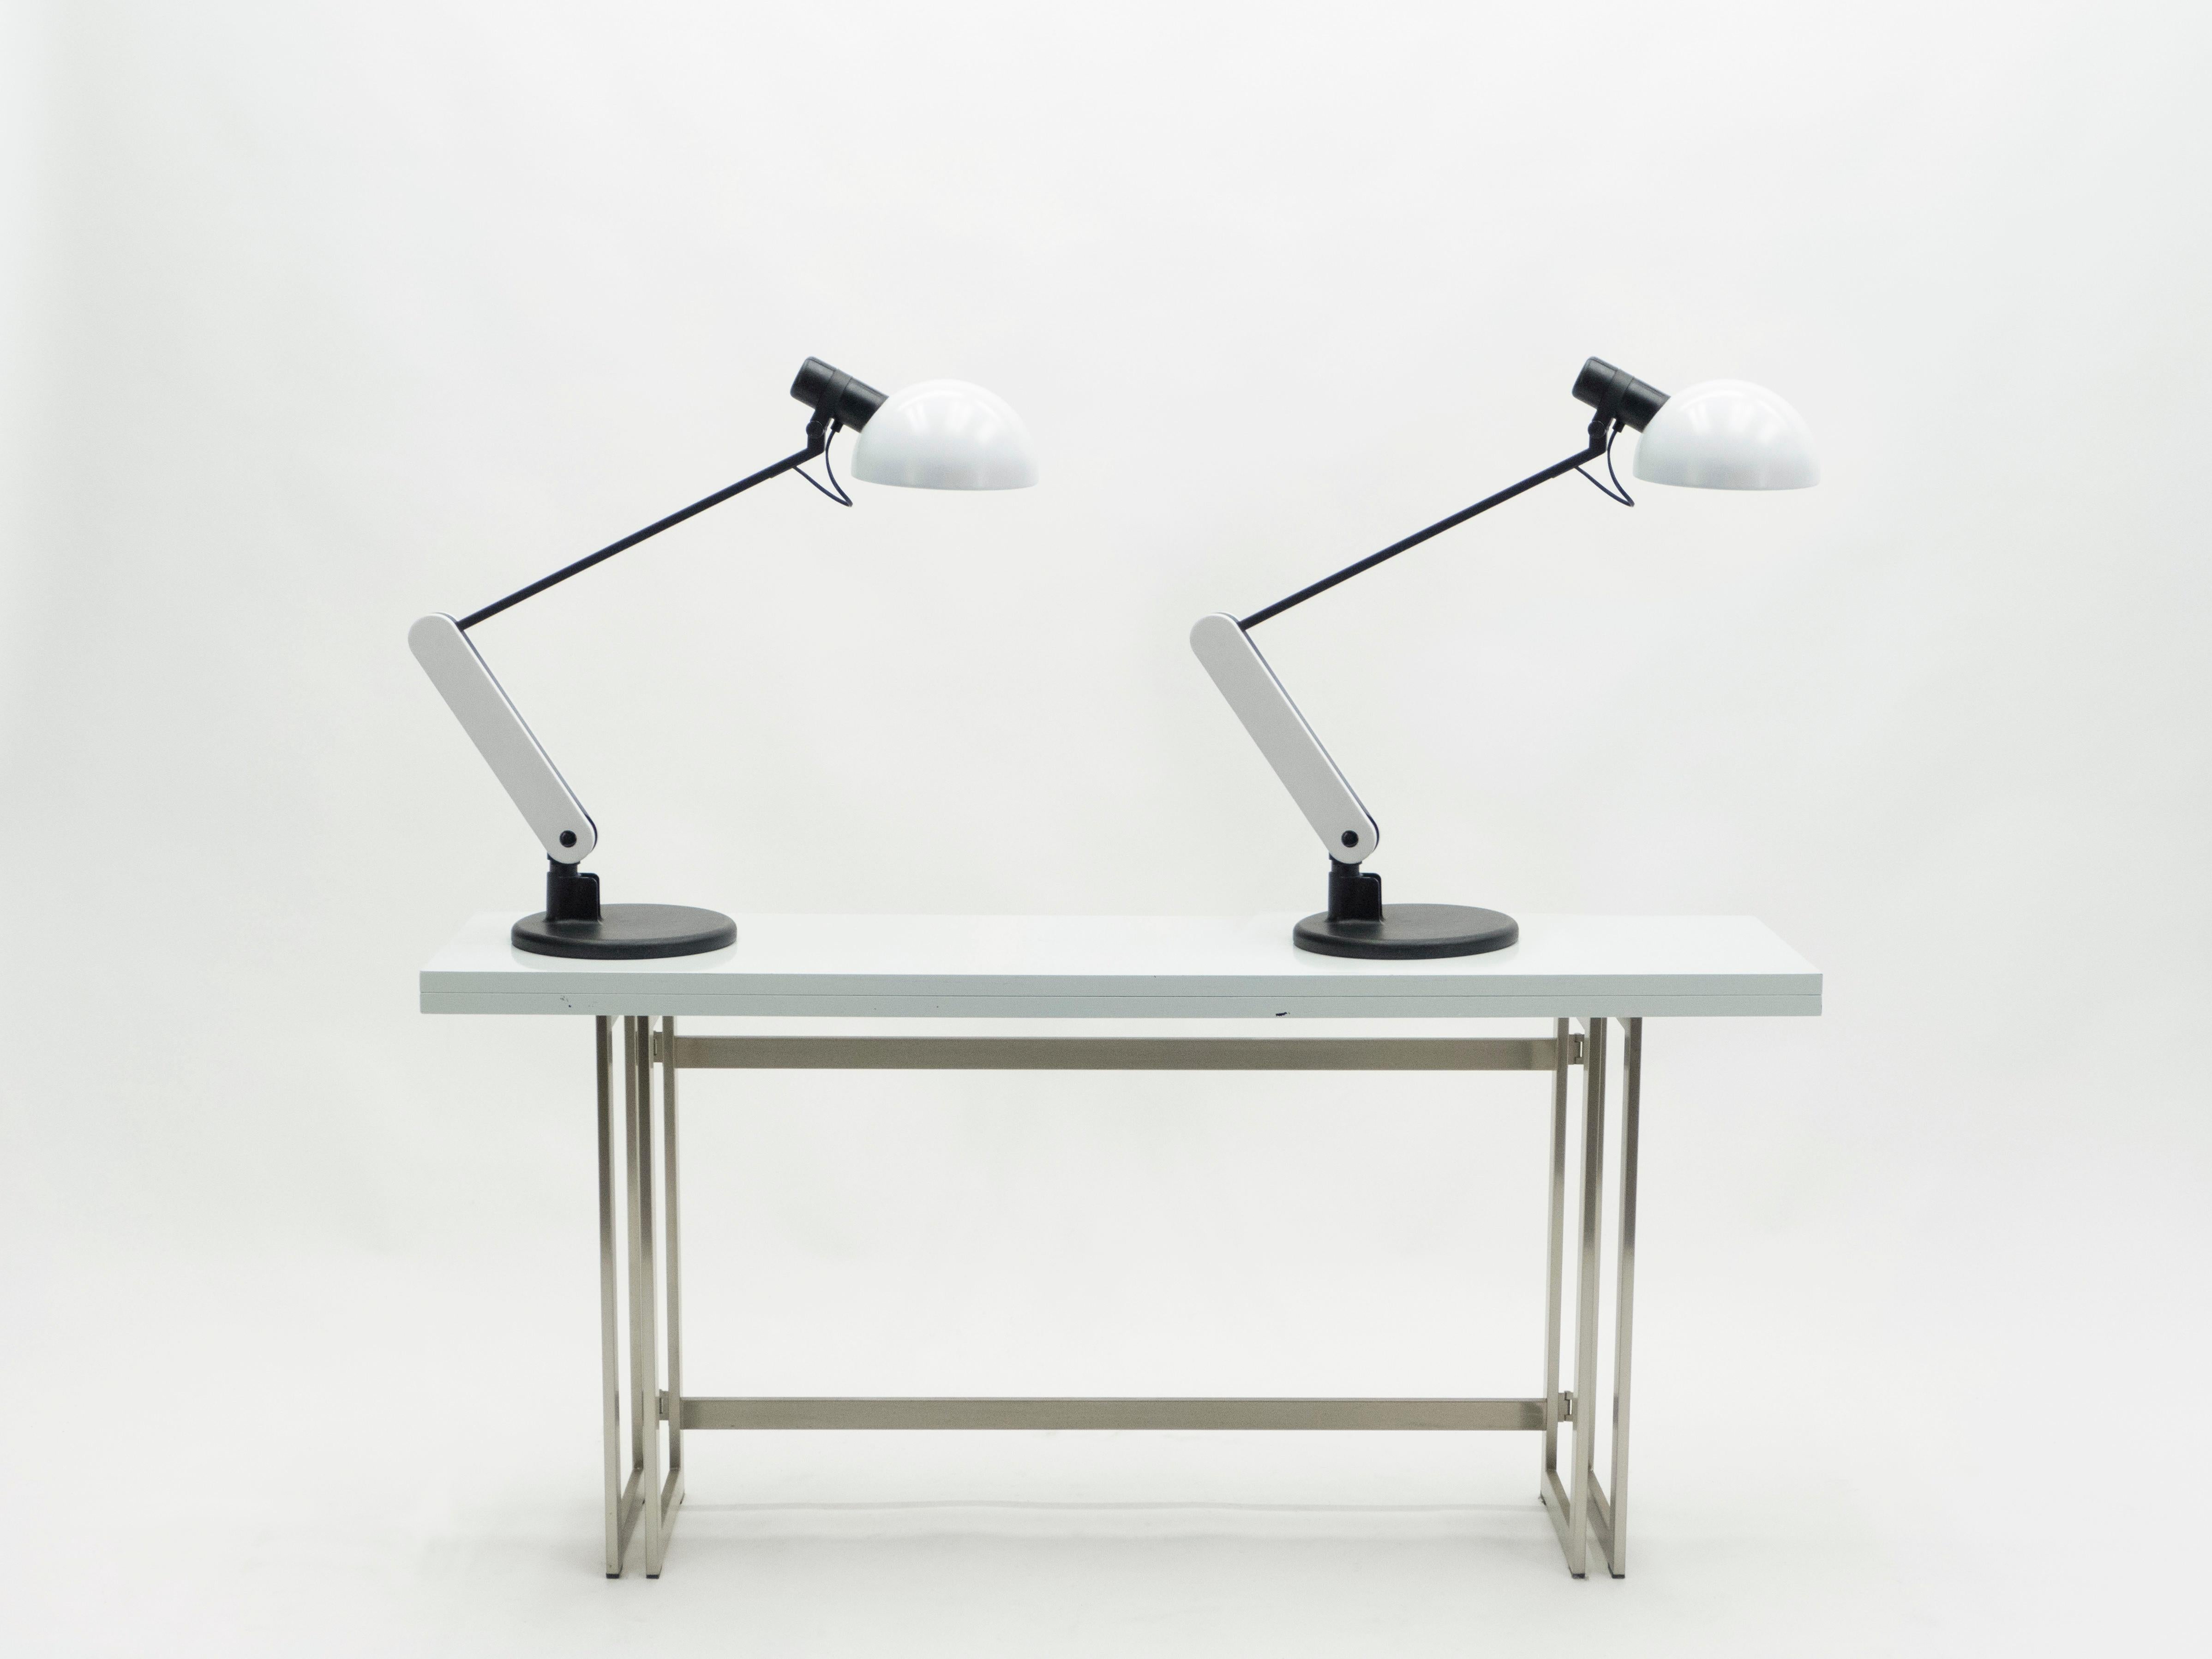 Rare pair of black and white Italian desk lamps by Harvey Guzzini with painted metal, fully adjustable, and in a typically Mid-Century Modern look. These modern-looking lamps would make a perfect addition to a contemporary or mid-century desk or,